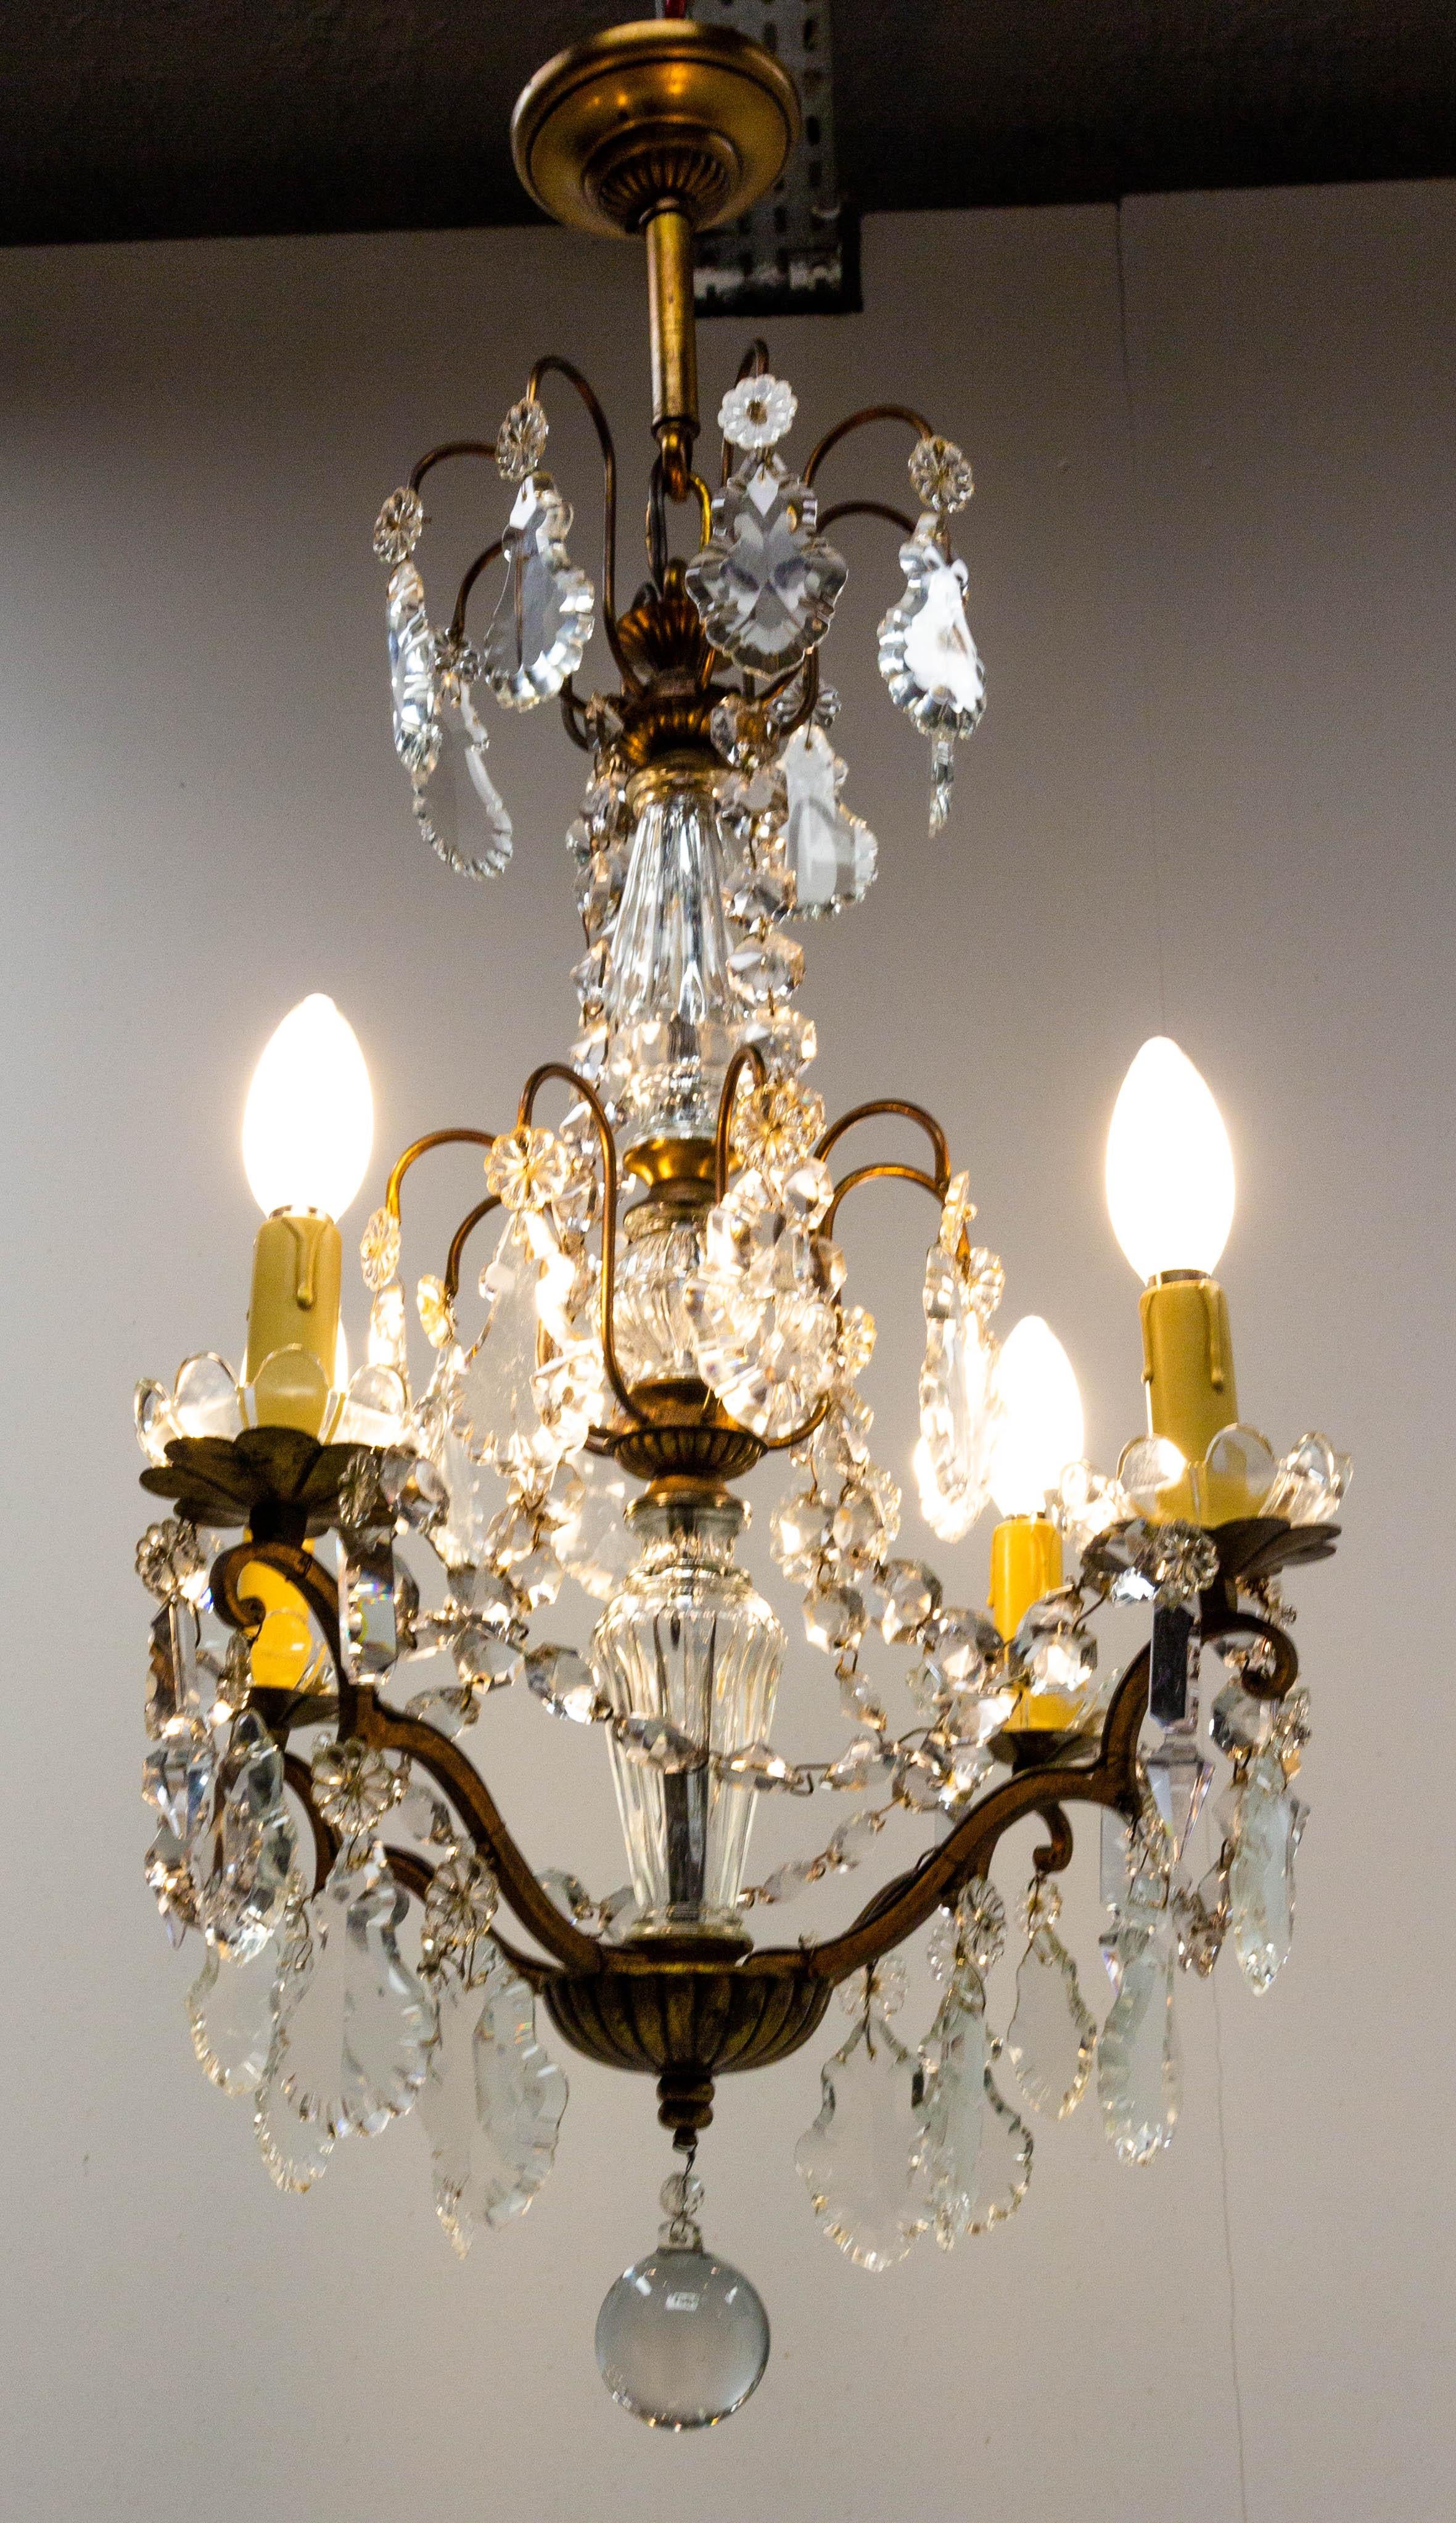 Chandelier with Crystal Drops and Ball Ceiling Pendant Midcentury, France For Sale 1